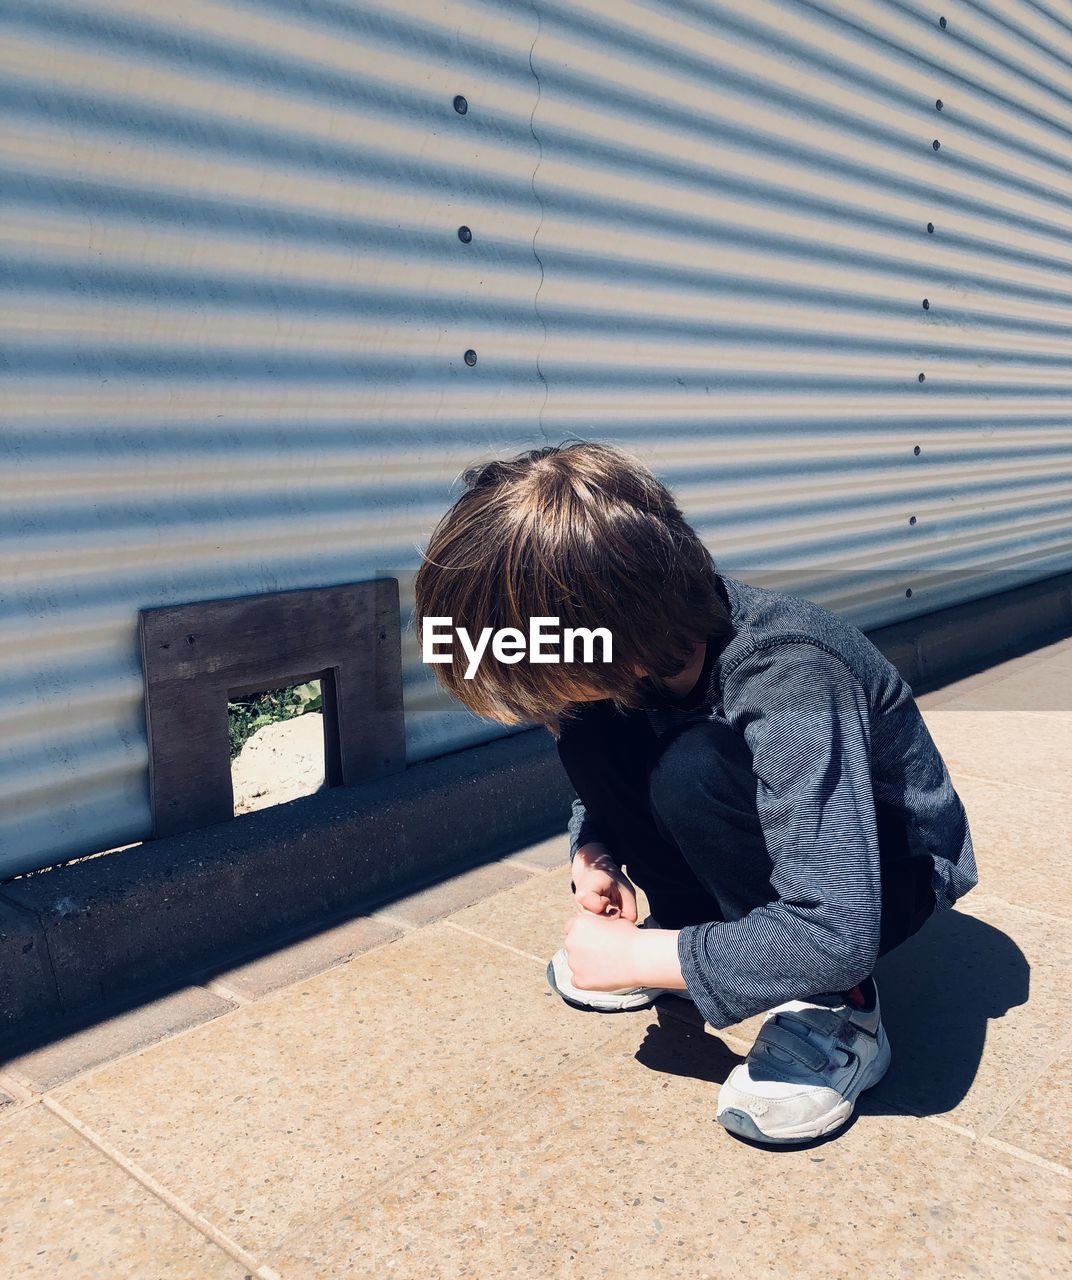 Boy looking at corrugated iron while crouching on sidewalk during sunny day